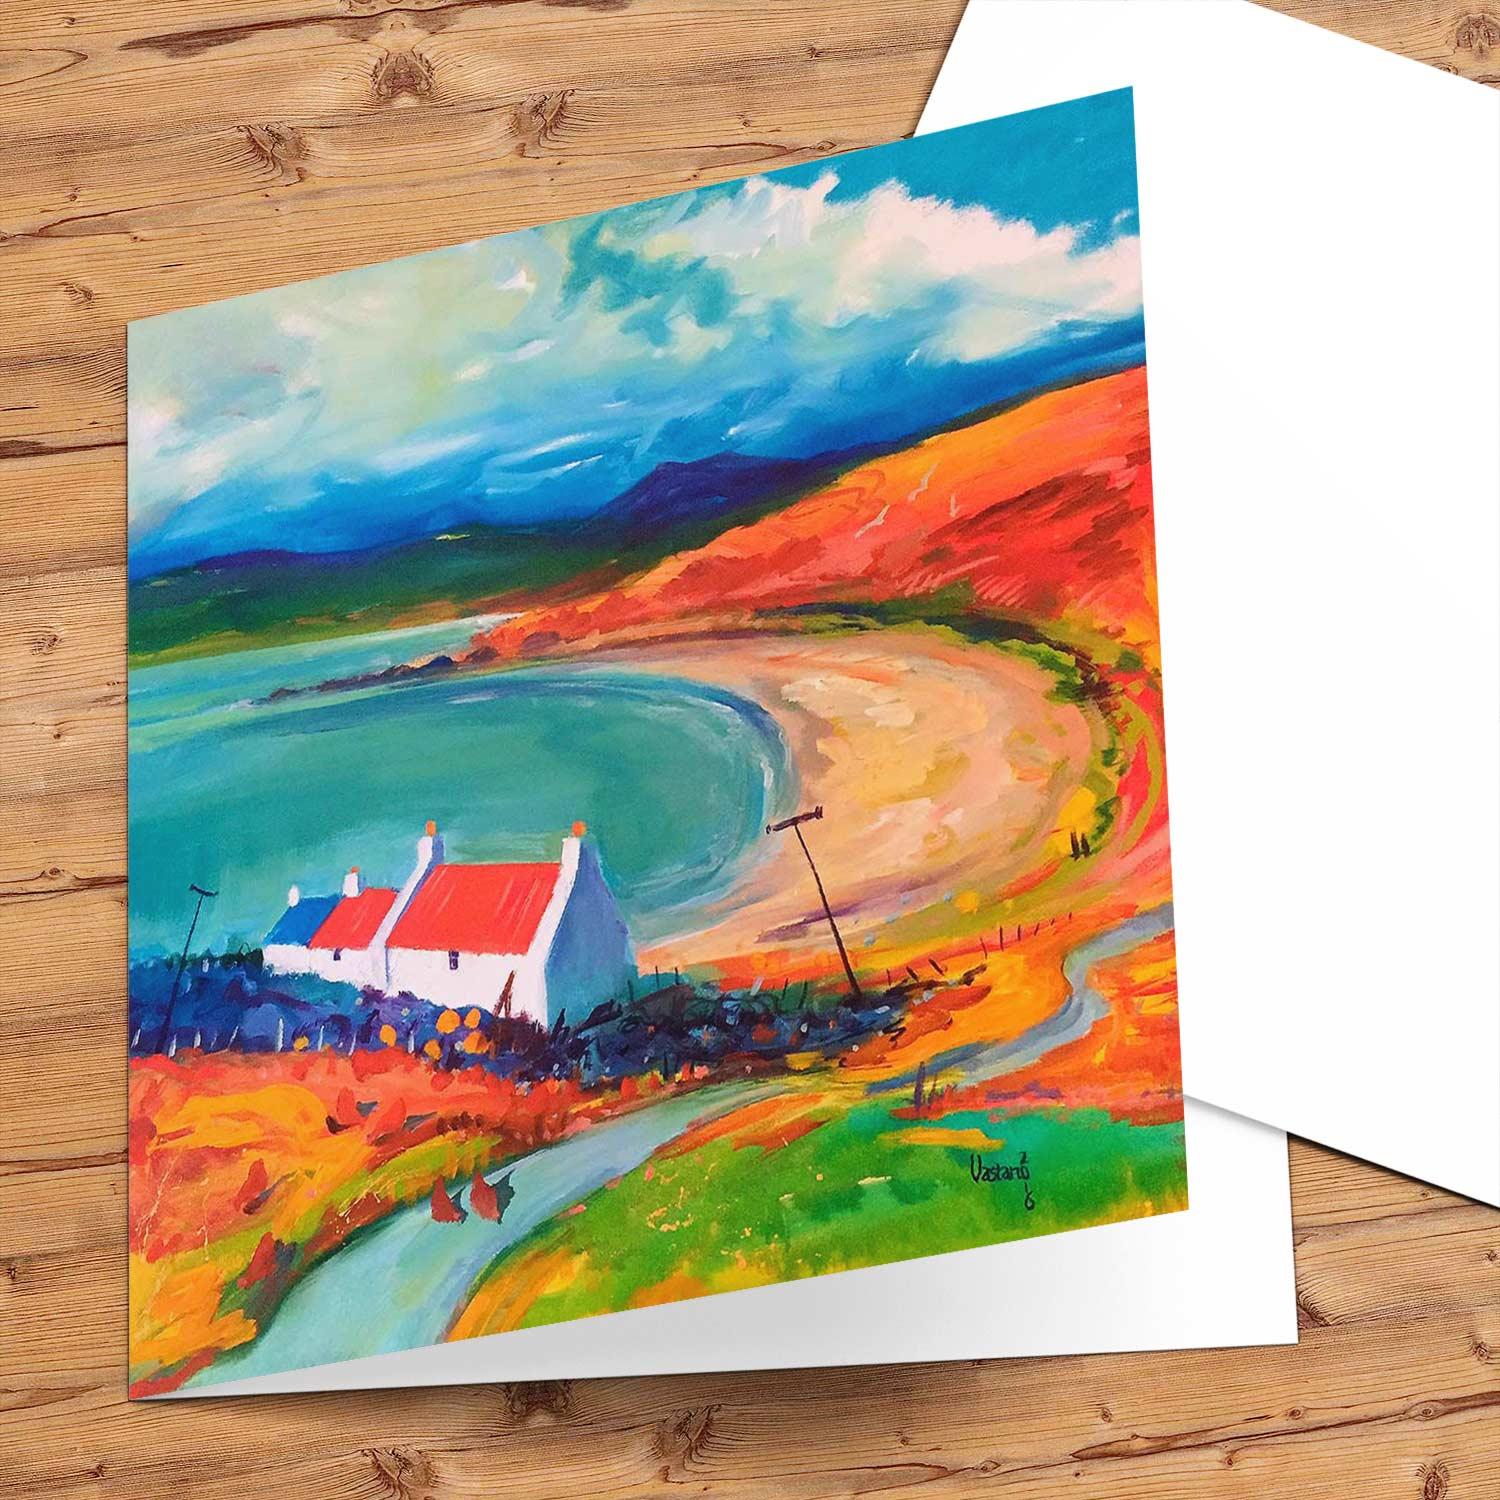 West Coast View Greeting Card from an original painting by artist Ann Vastano